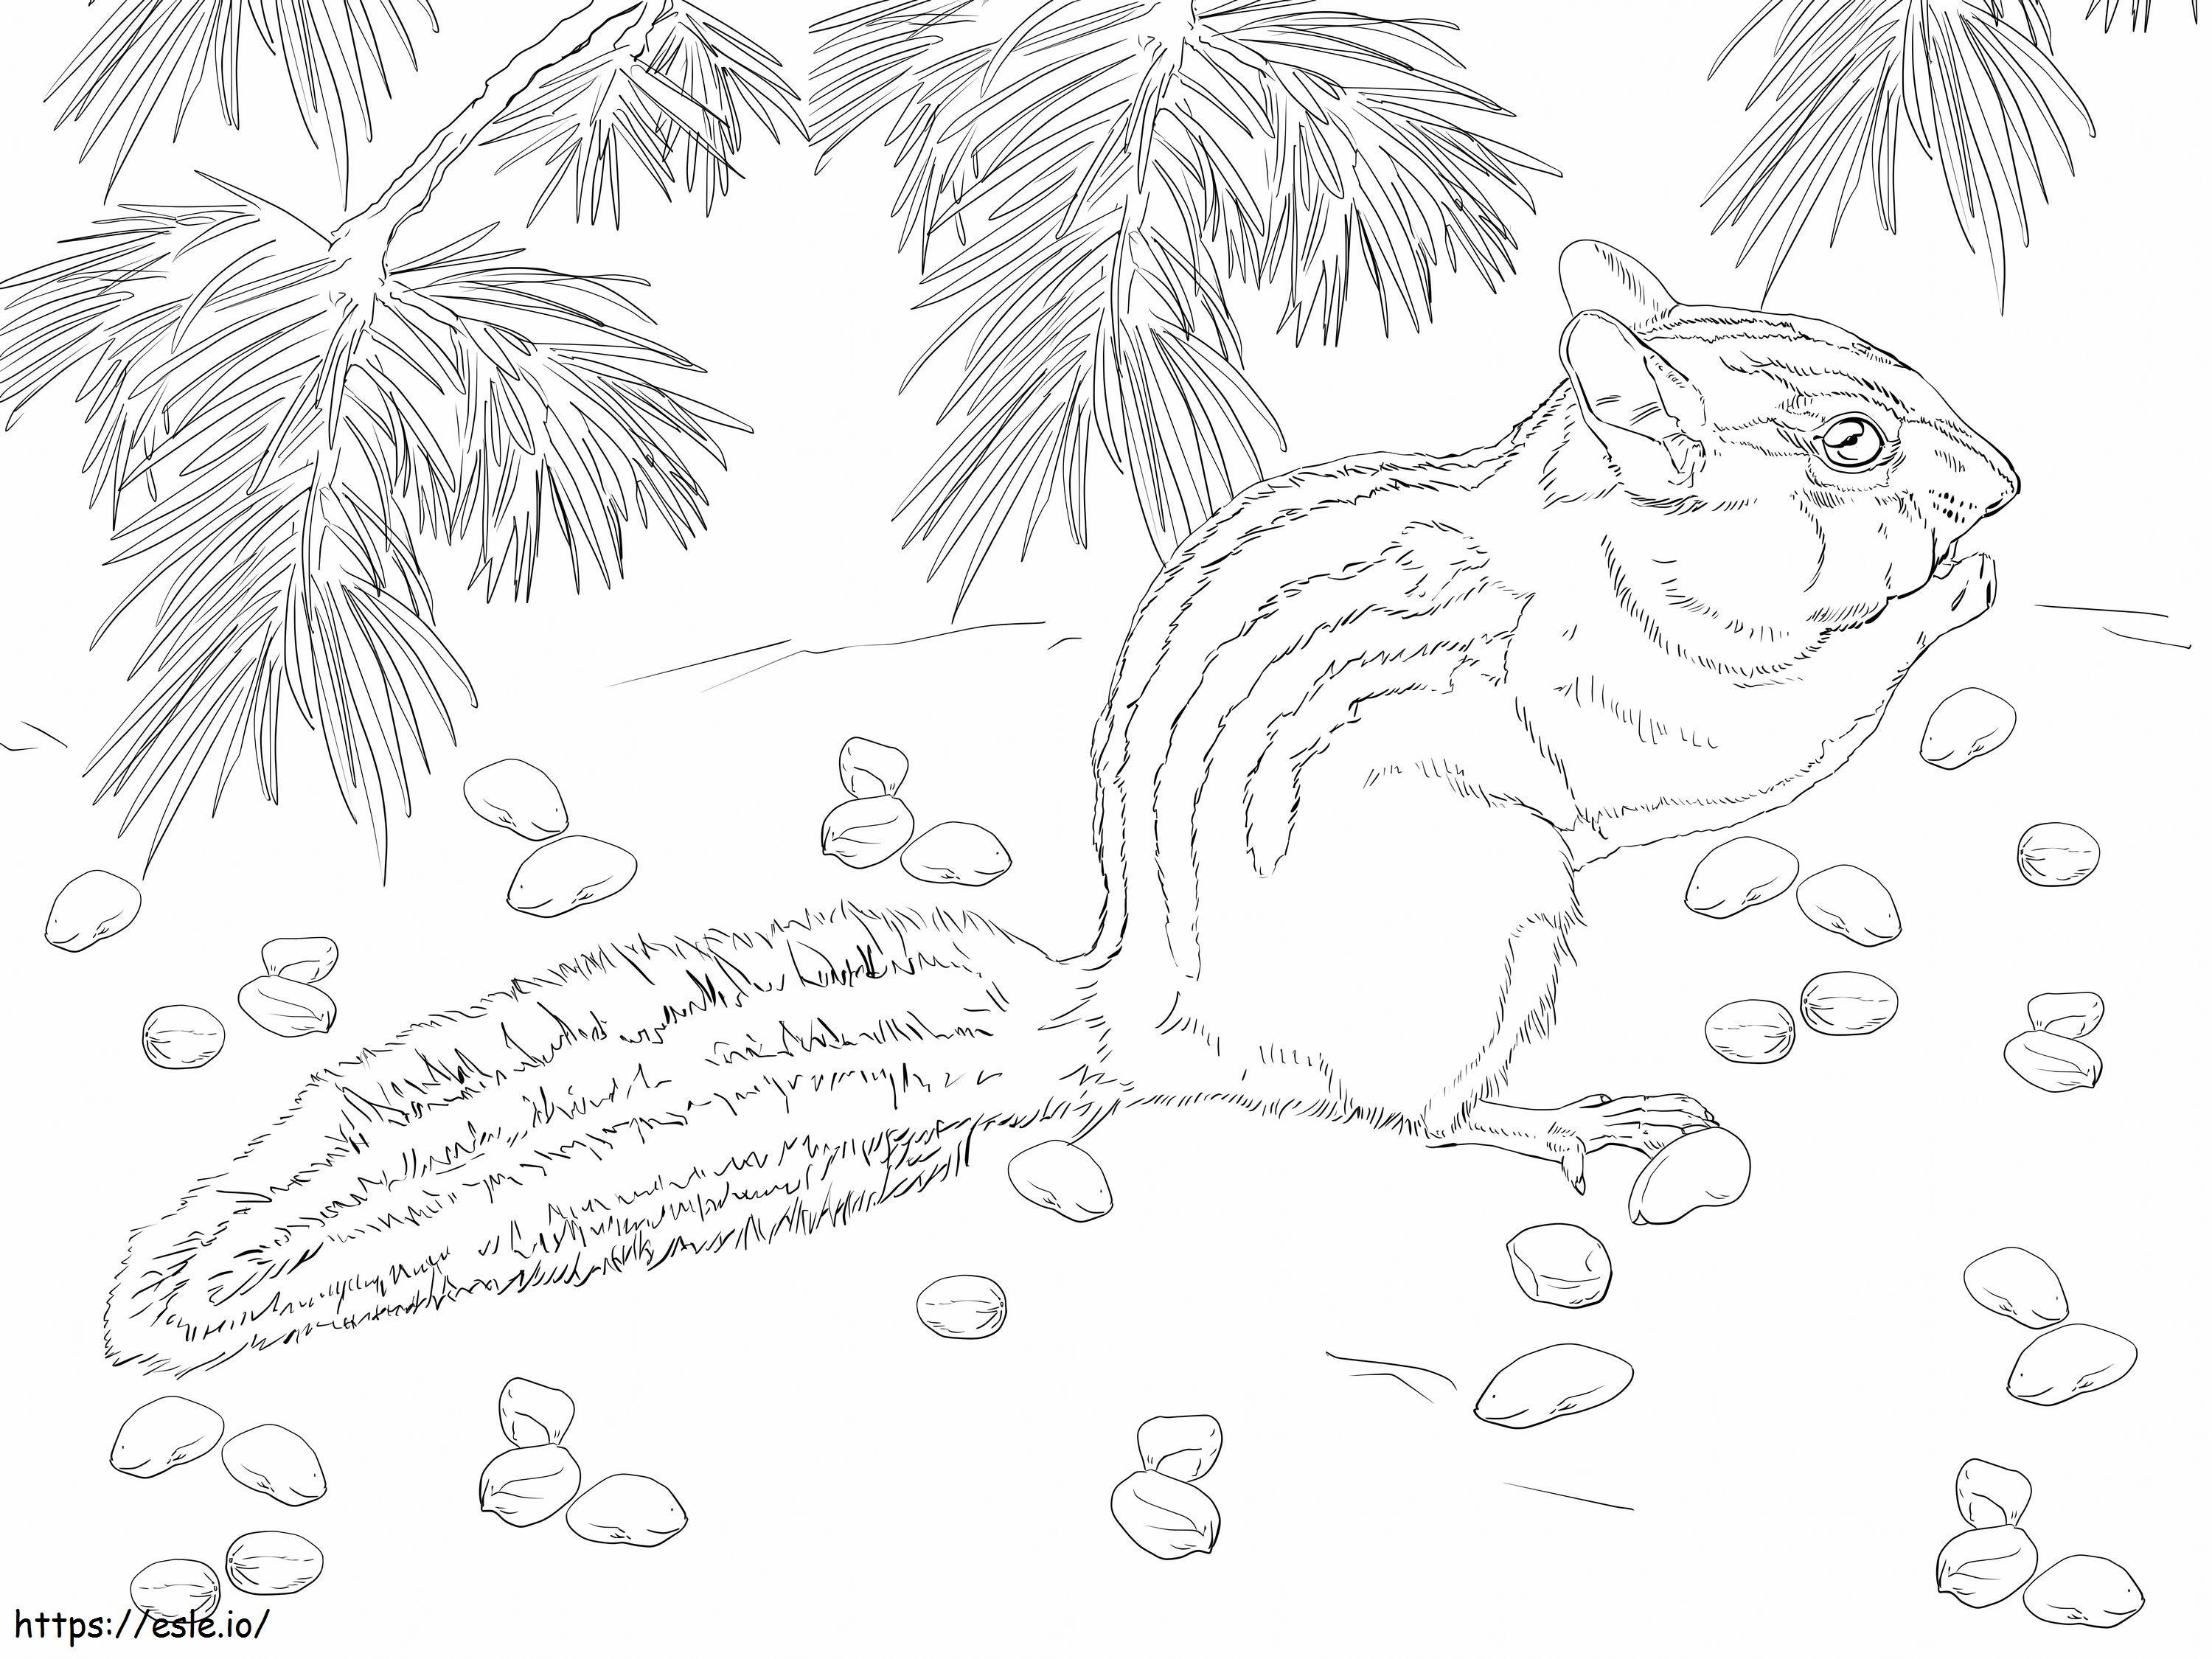 Townsends Chipmunk coloring page